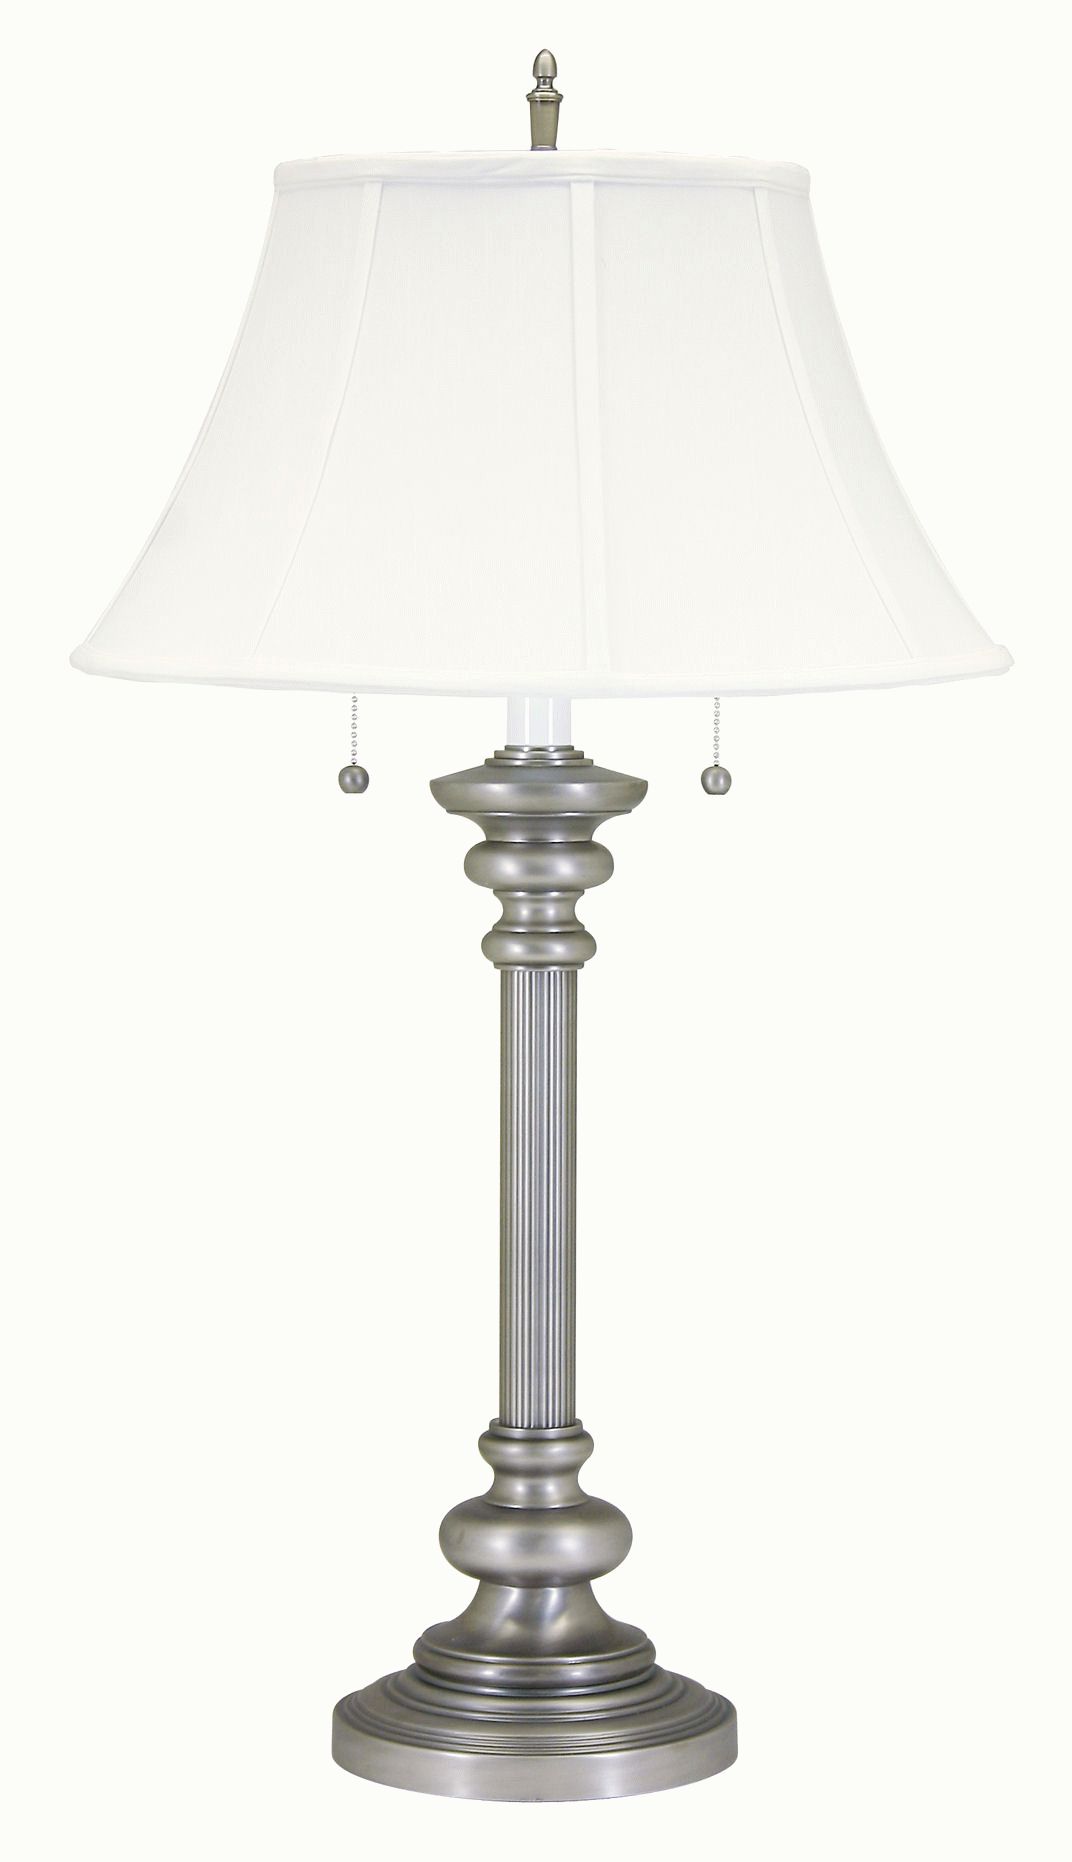 Widely Used N651 House Of Troy Newport Pull Chain Table Lamp In Standing Lamps With Dual Pull Chains (View 8 of 10)